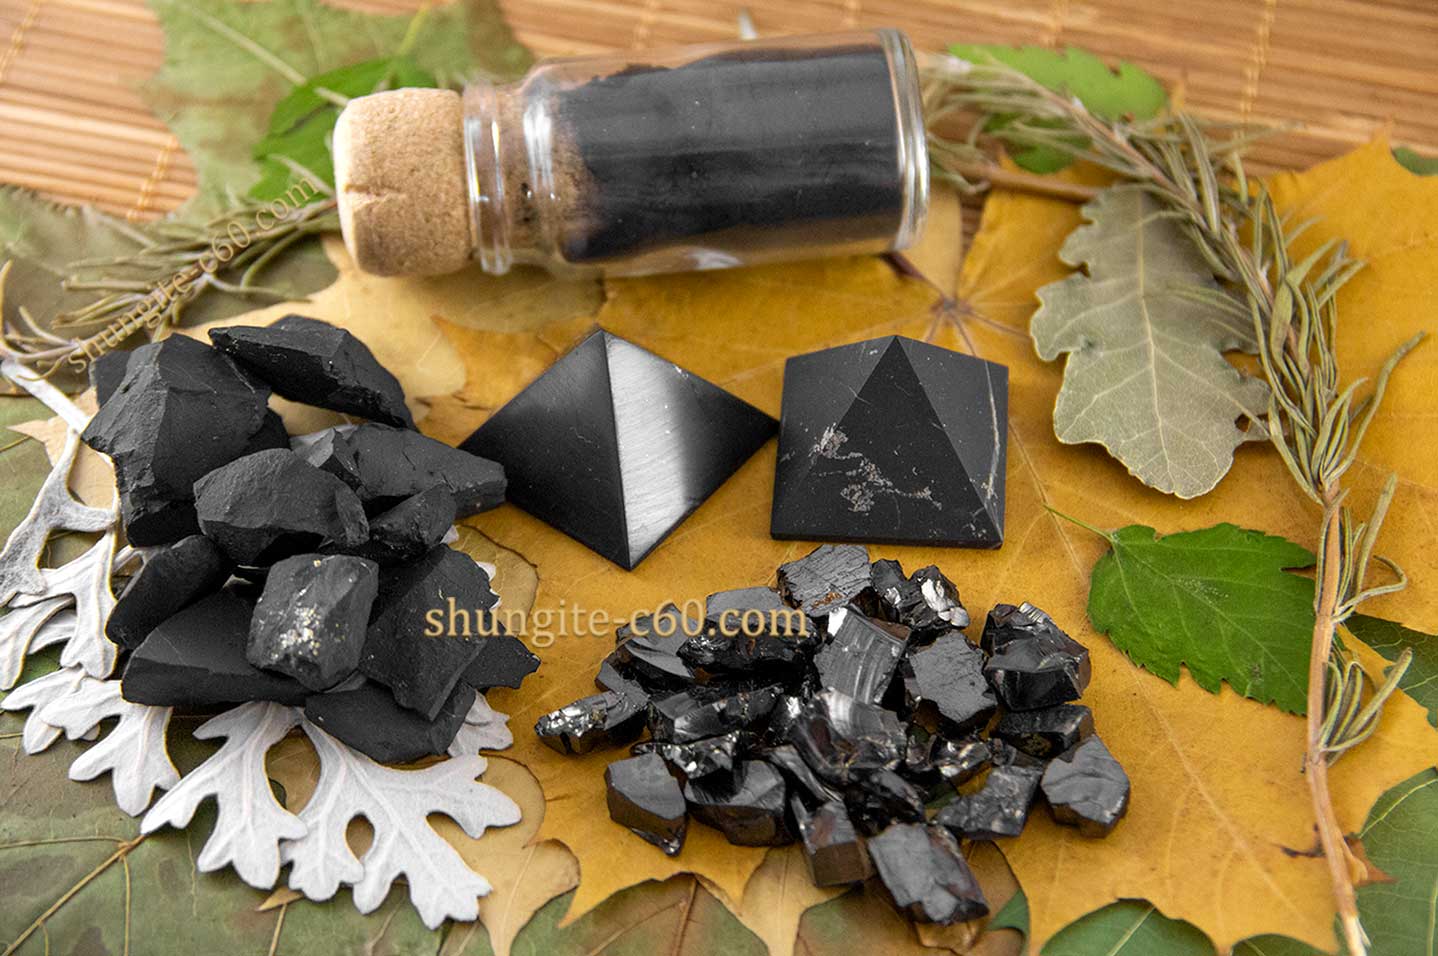 authentic shungite products 